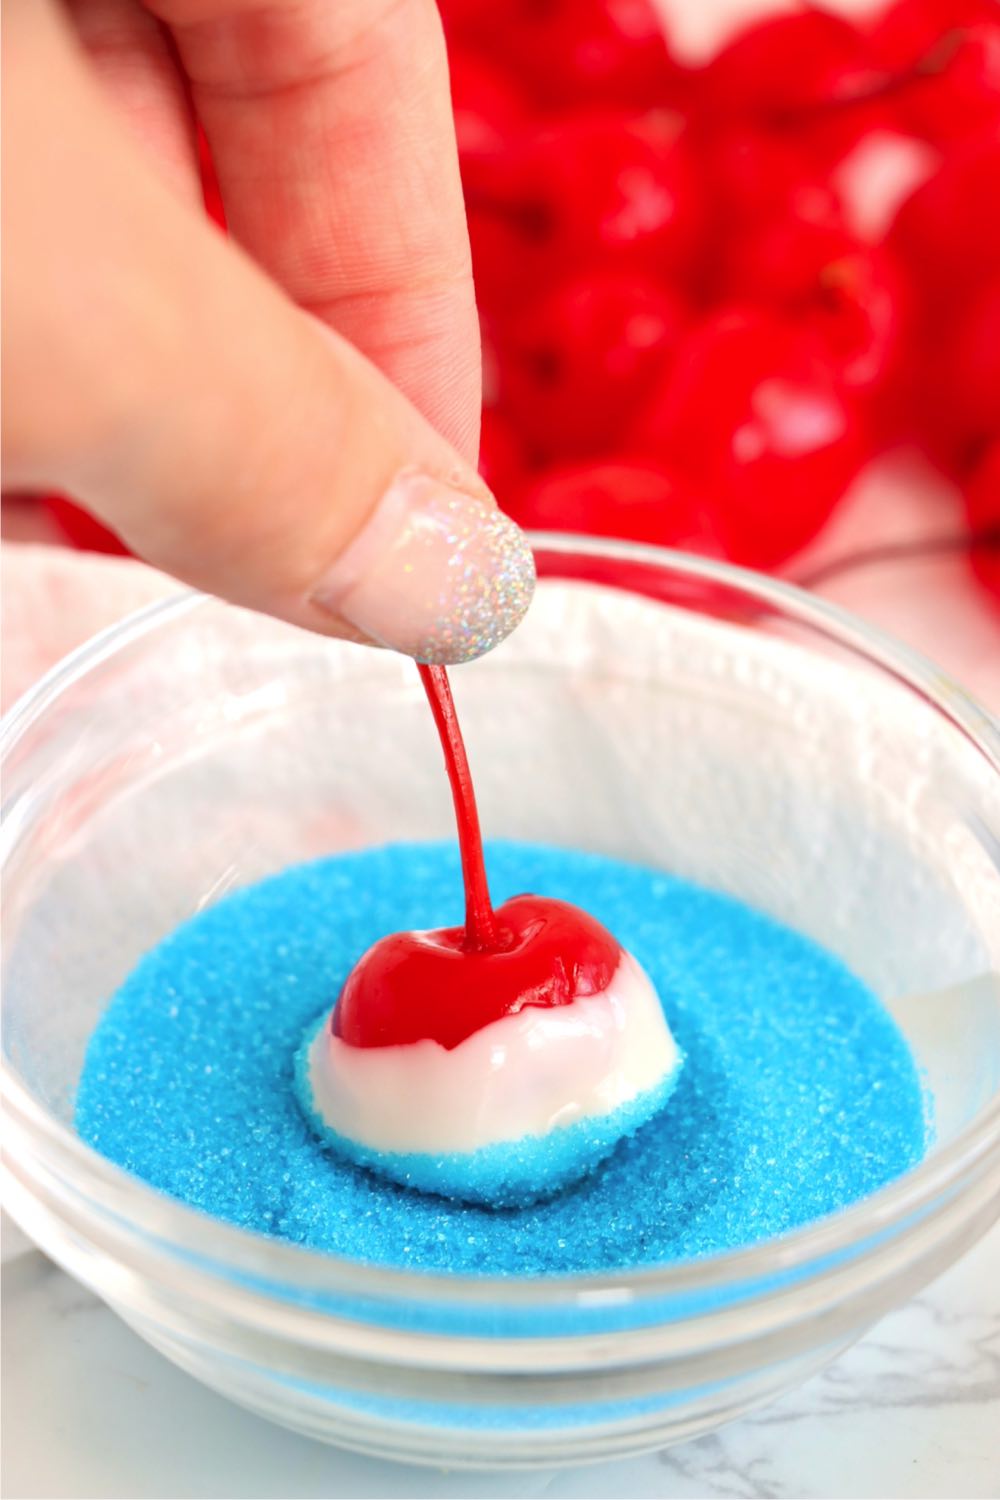 Dipping a white chocolate covered cherry into blue sprinkles.